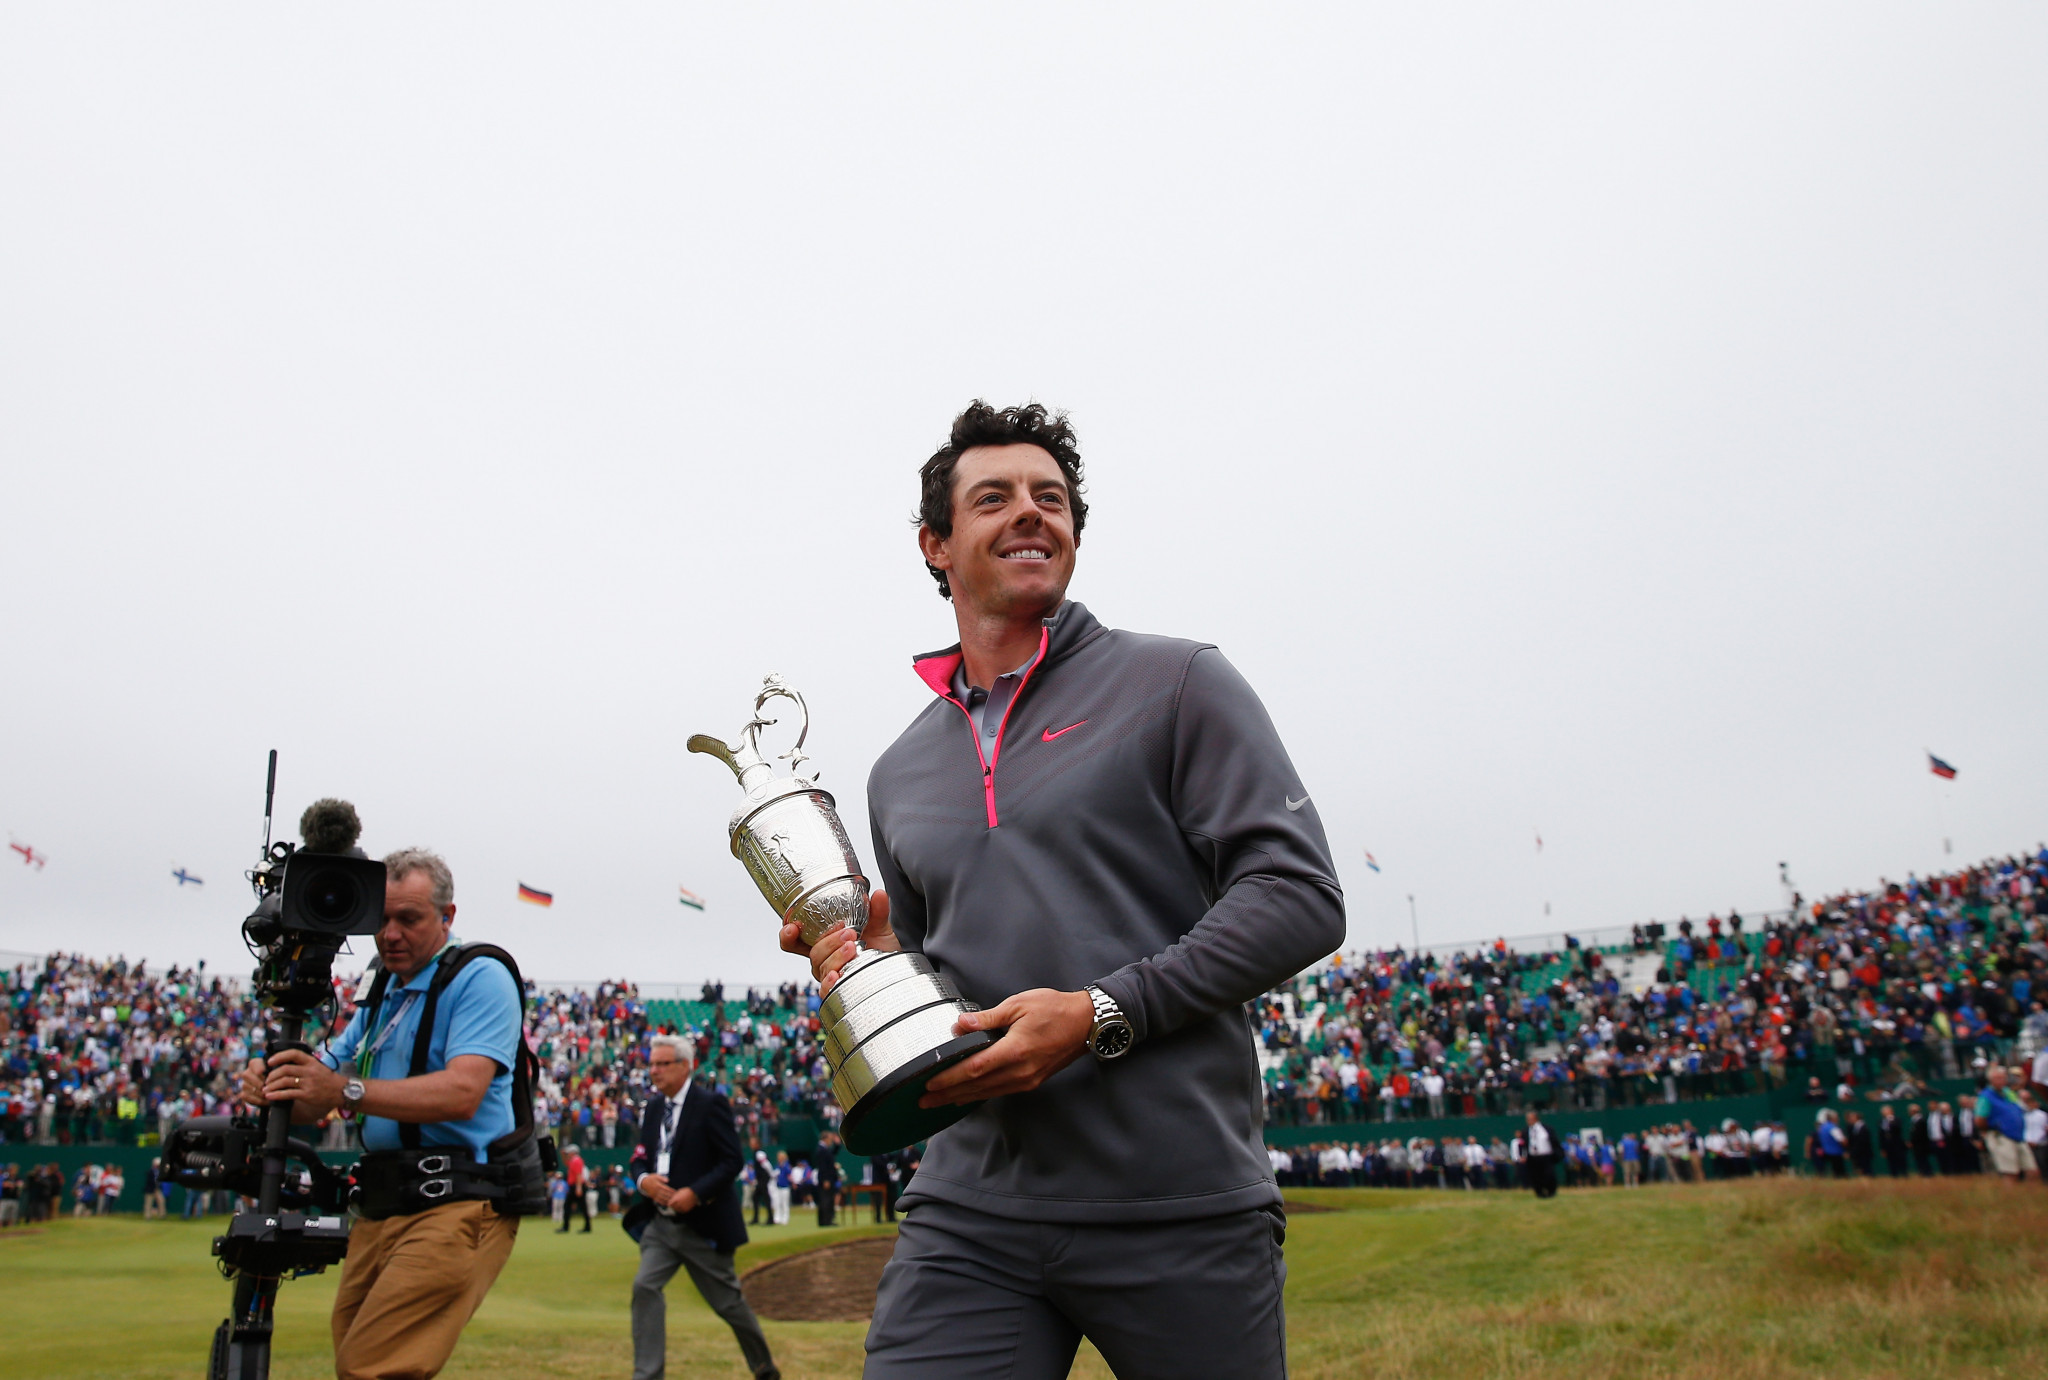  Rory McIlroy lifted the Claret Jug when The Open was last held at Royal Liverpool in 2014 ©Getty Images